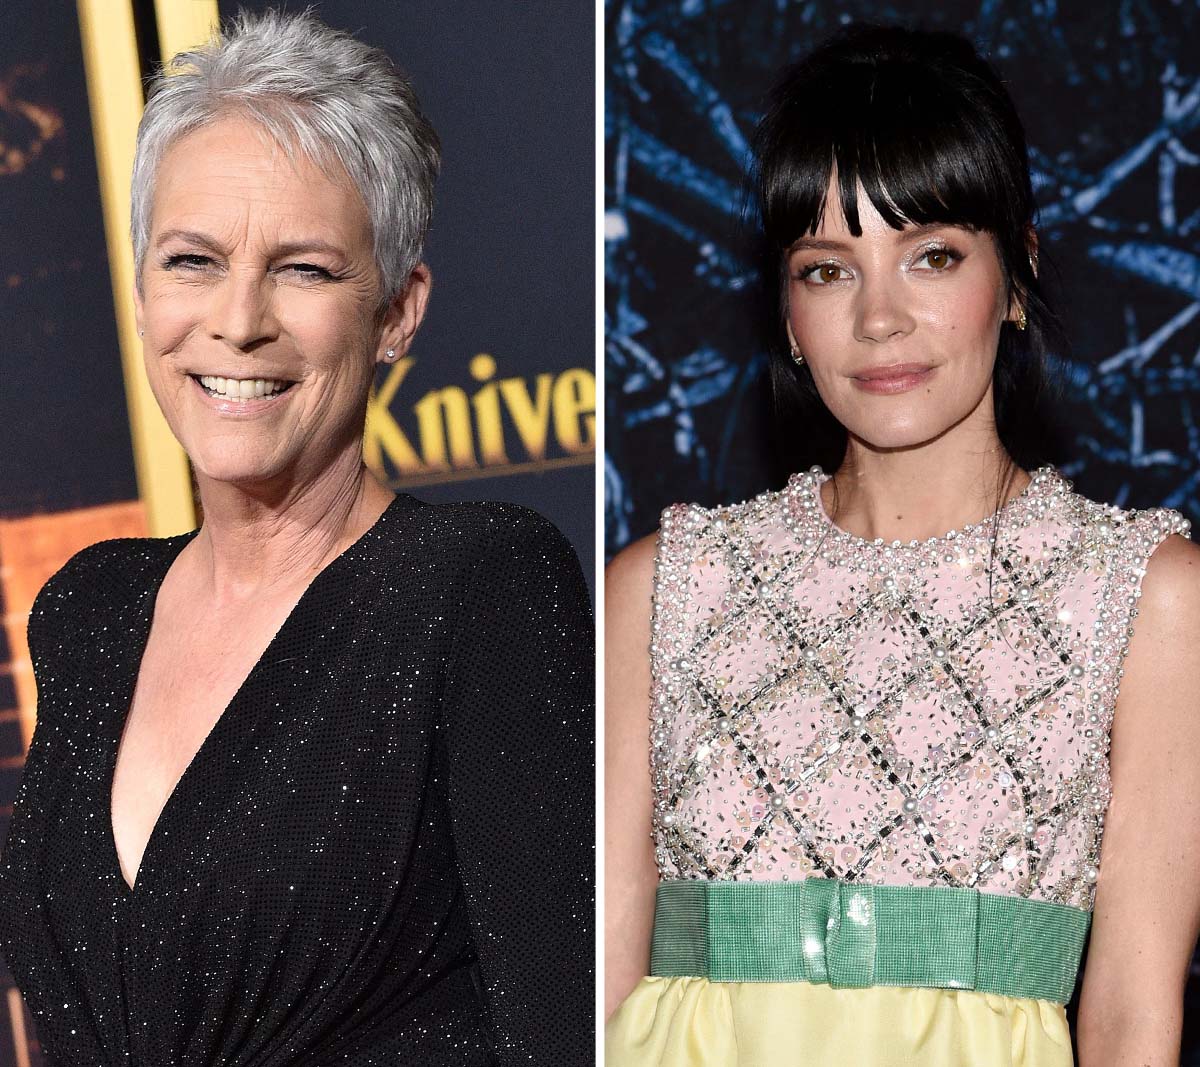 Stars React to ‘Nepo Baby’ Article, Claims of Favoritism in Hollywood: Jamie Lee Curtis, Lily Allen and More